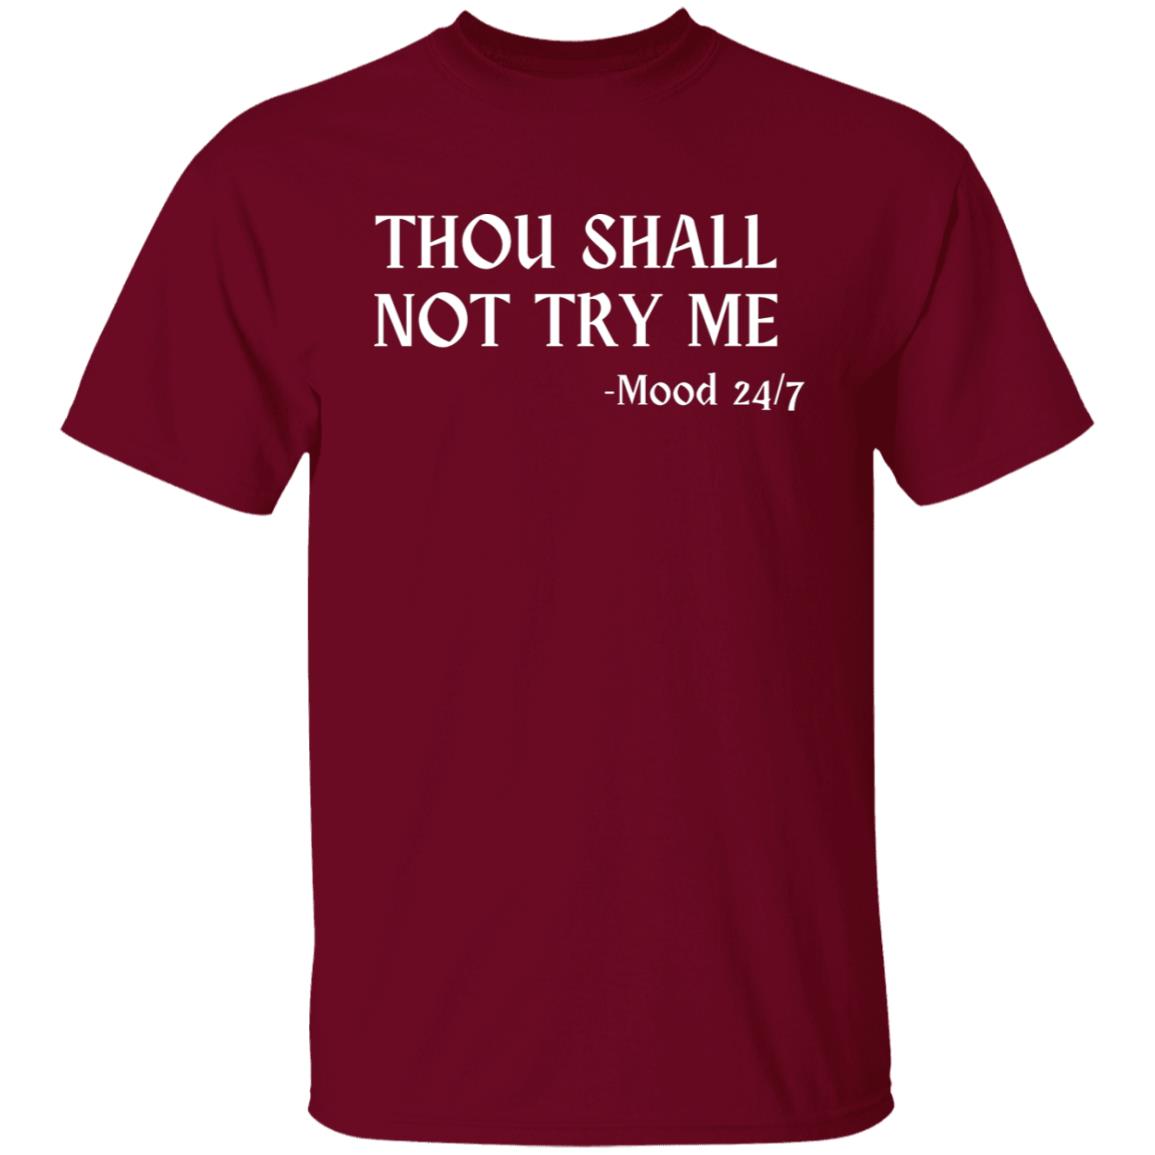 Thou Shall Not Try Me Mood 24/7 Funny Bible Verse Quote Tee T-Shirt